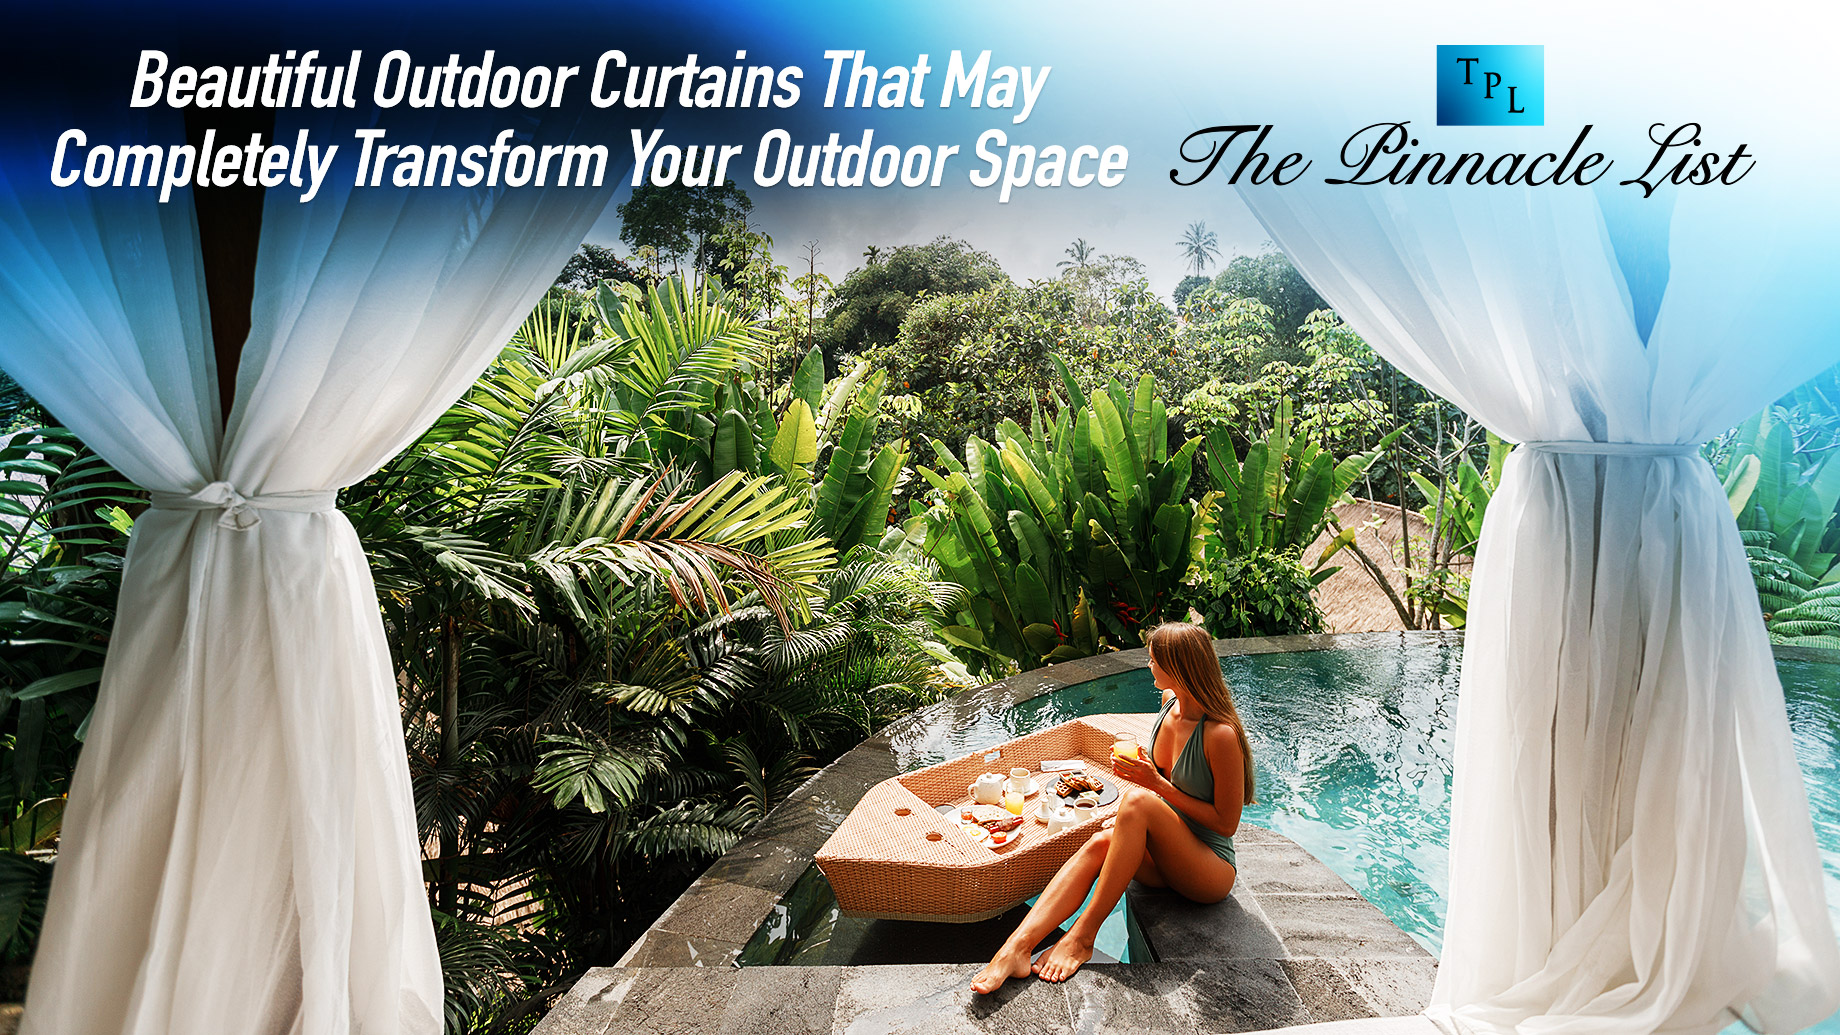 Beautiful Outdoor Curtains That May Completely Transform Your Outdoor Space